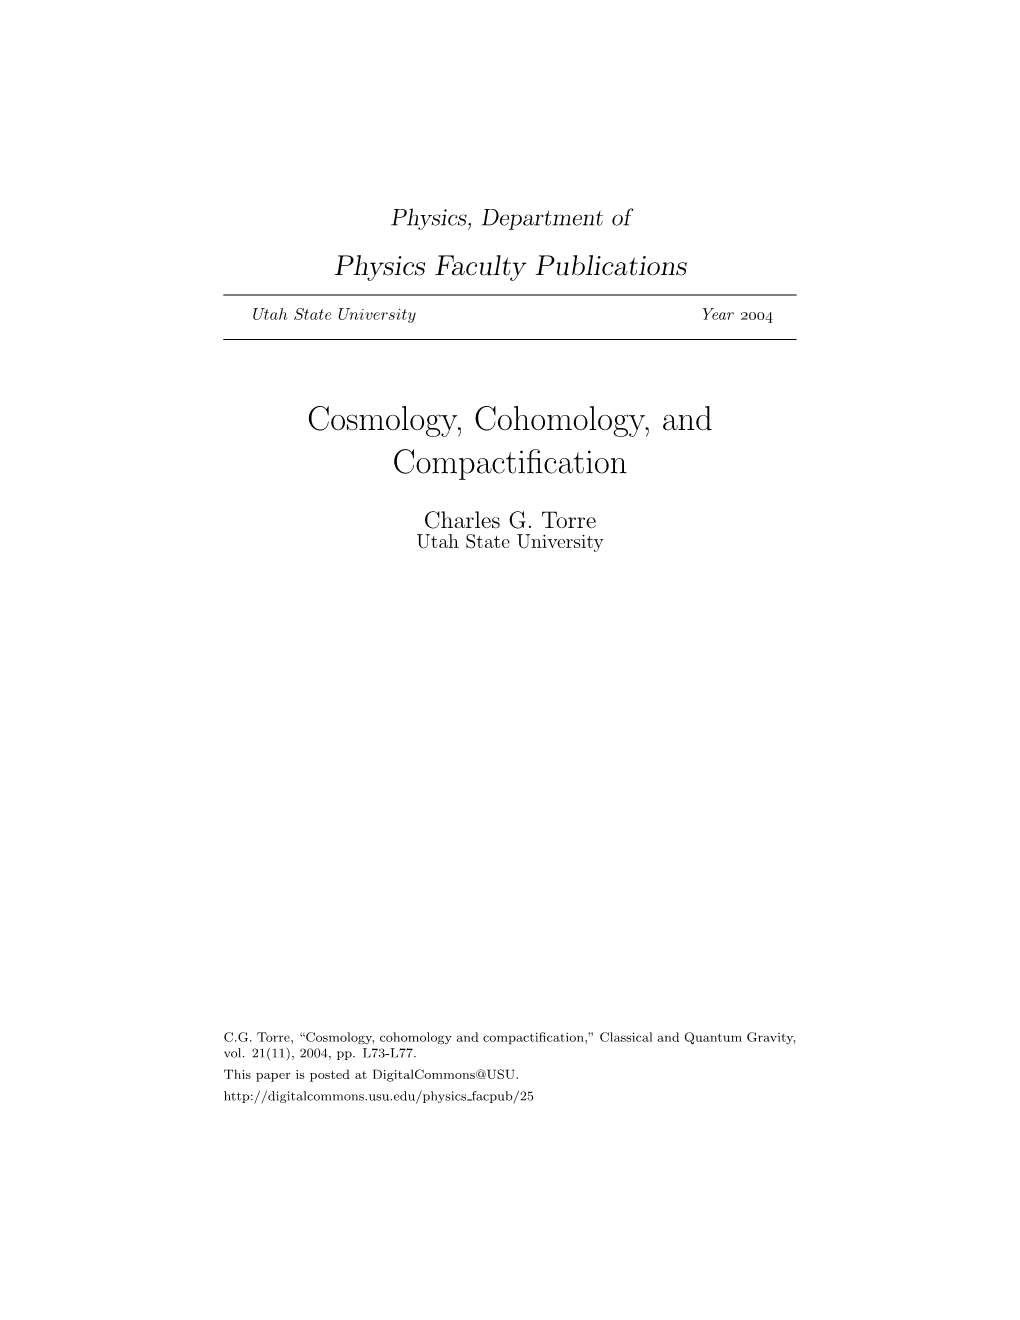 Cosmology, Cohomology, and Compactification